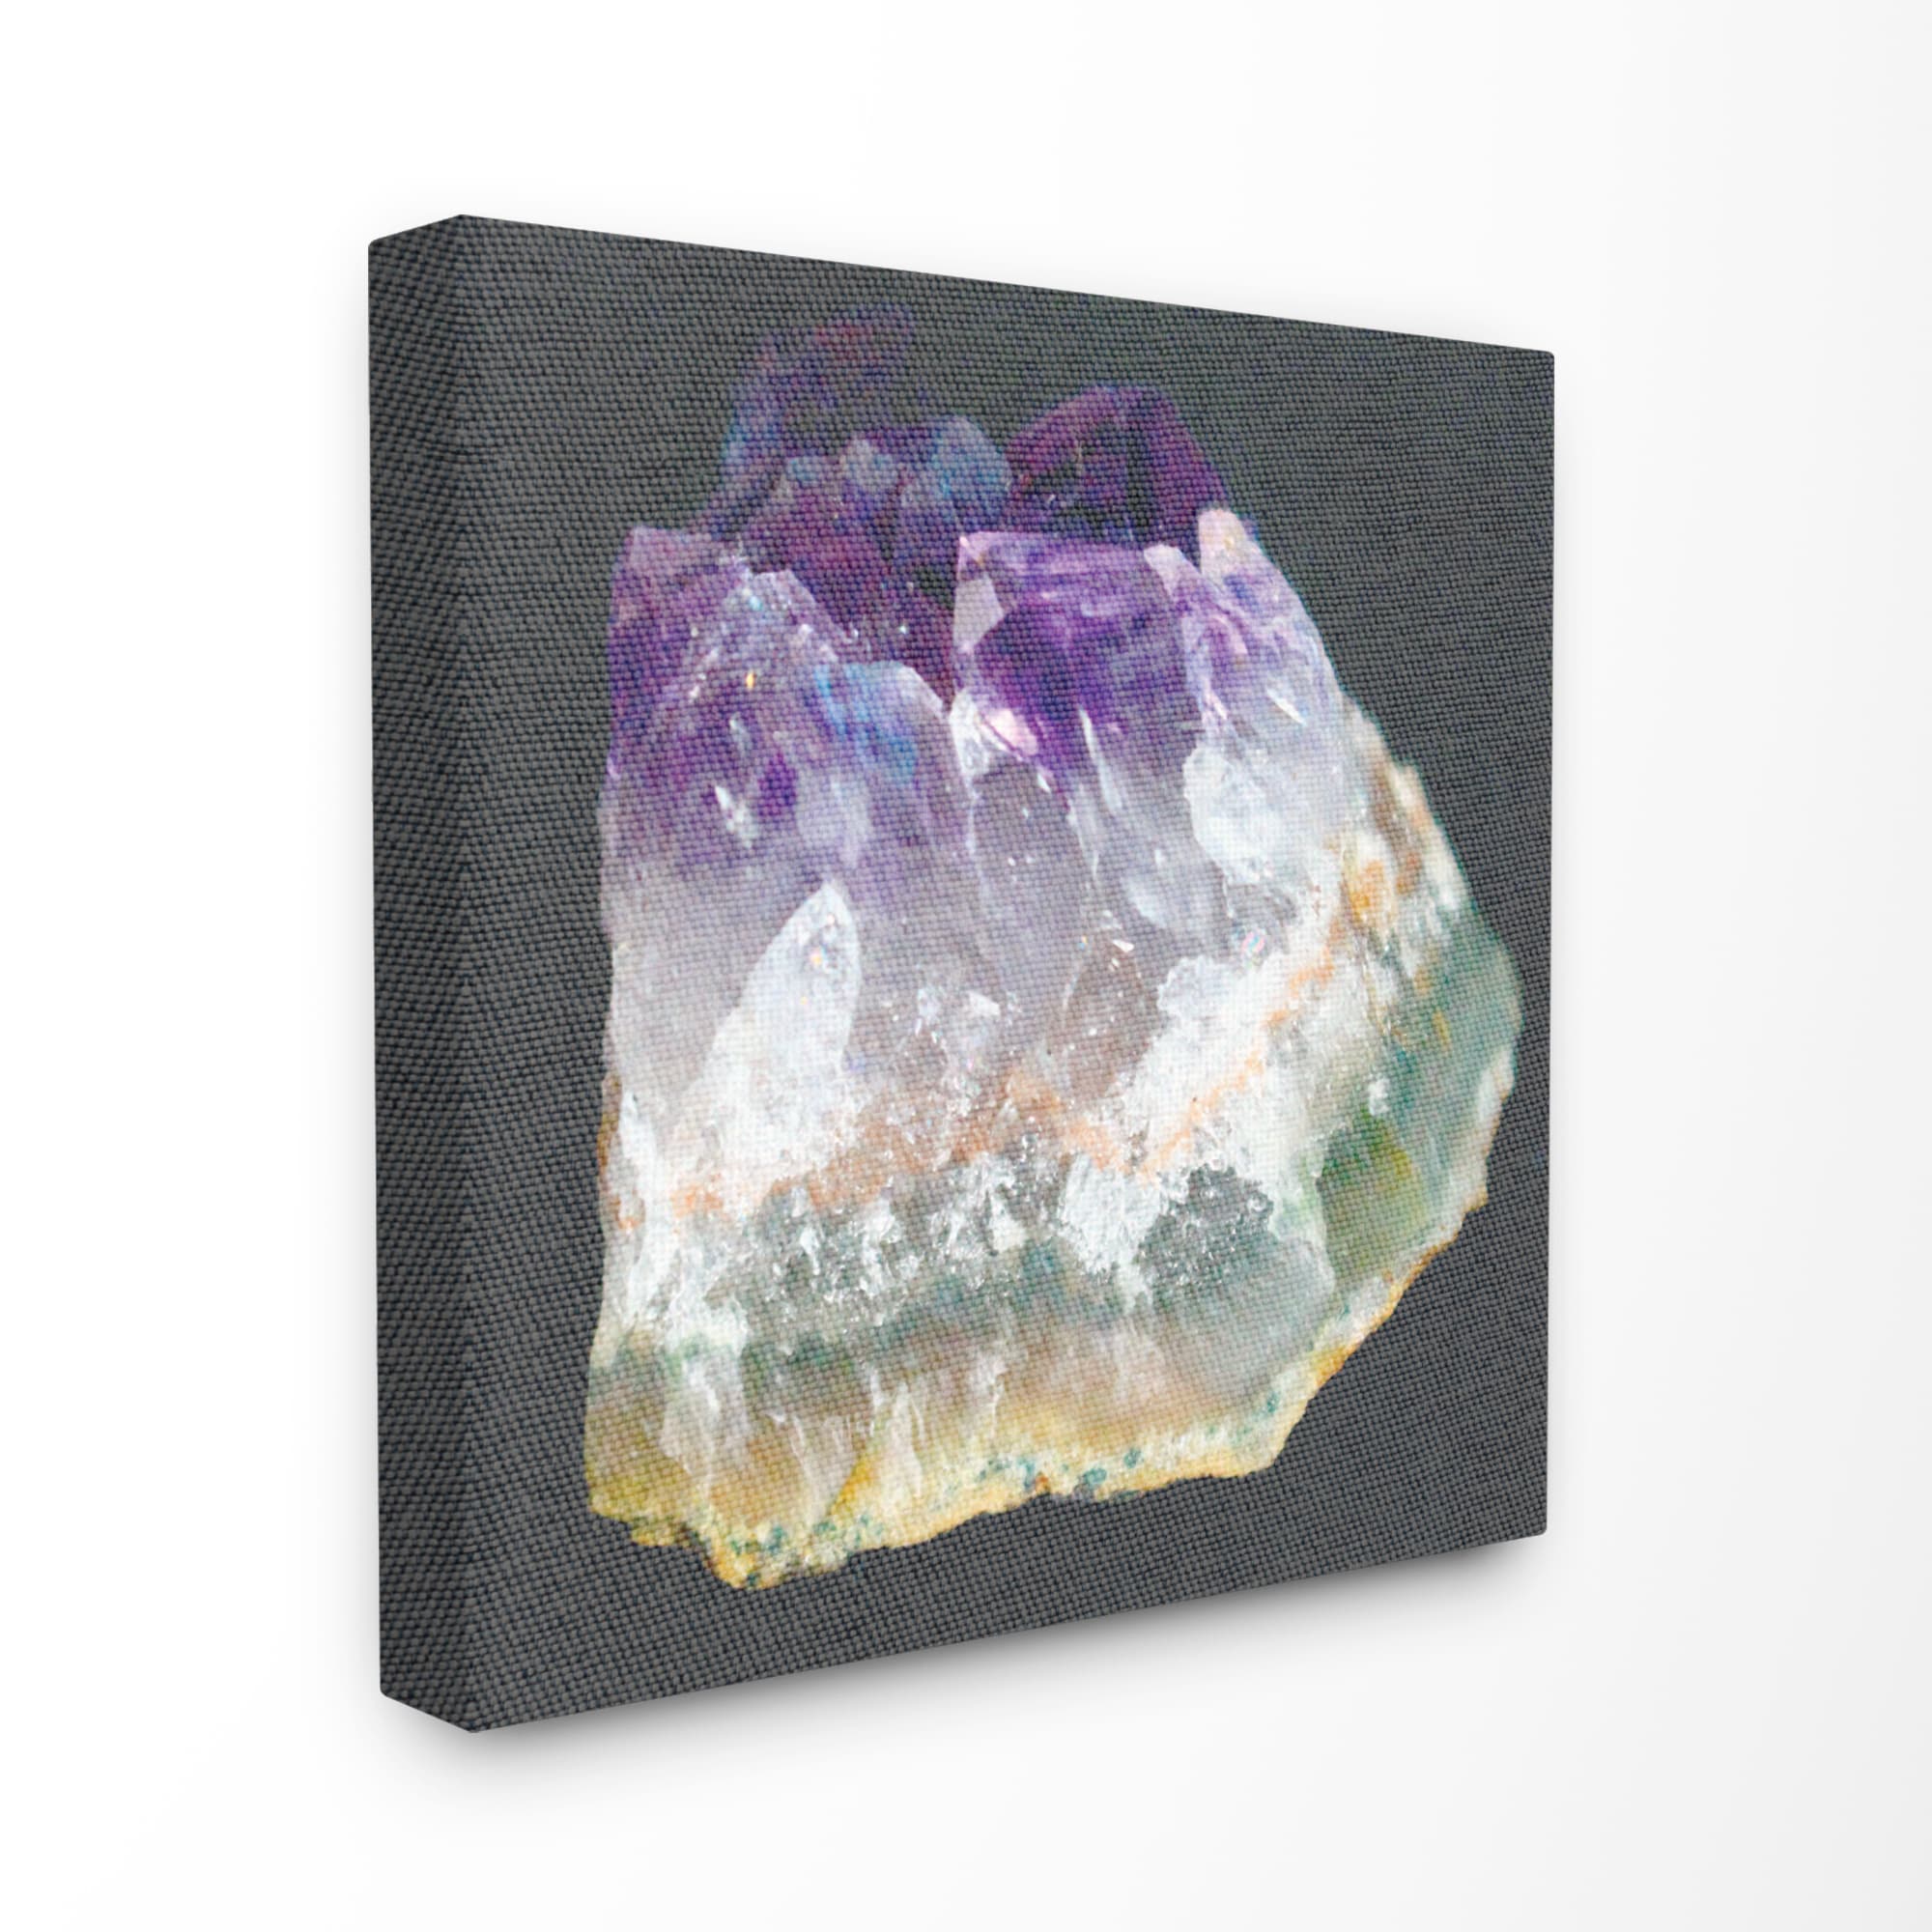 Amethyst on Subtle Grey Linen Canvas Photograph Wall Art at Lowes.com